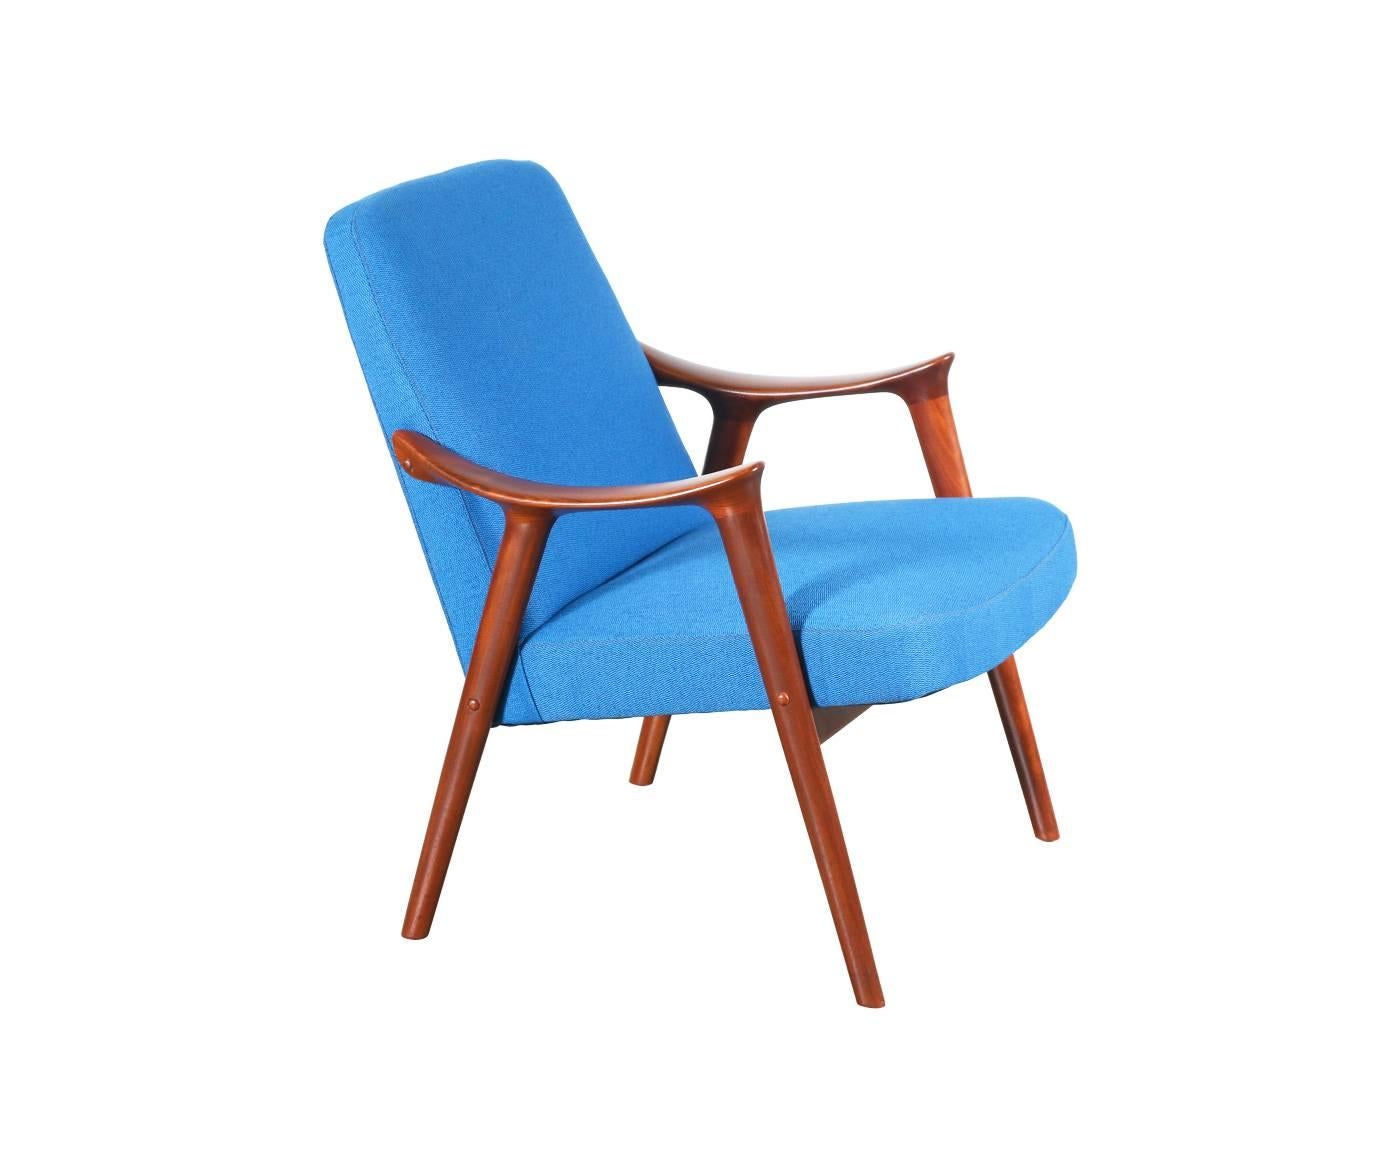 Designer: Rolf Rastad & Adolf Relling
Manufacturer: Møre Lenestolfabrikk
Period/Style: Scandinavian Modern
Country: Norway
Date: 1950s

Dimensions: 30.5″H x 26.75″W x 28″D
Seat Height 15.5″
Materials: Afromosia Teak, Cotton Tweed
Condition: